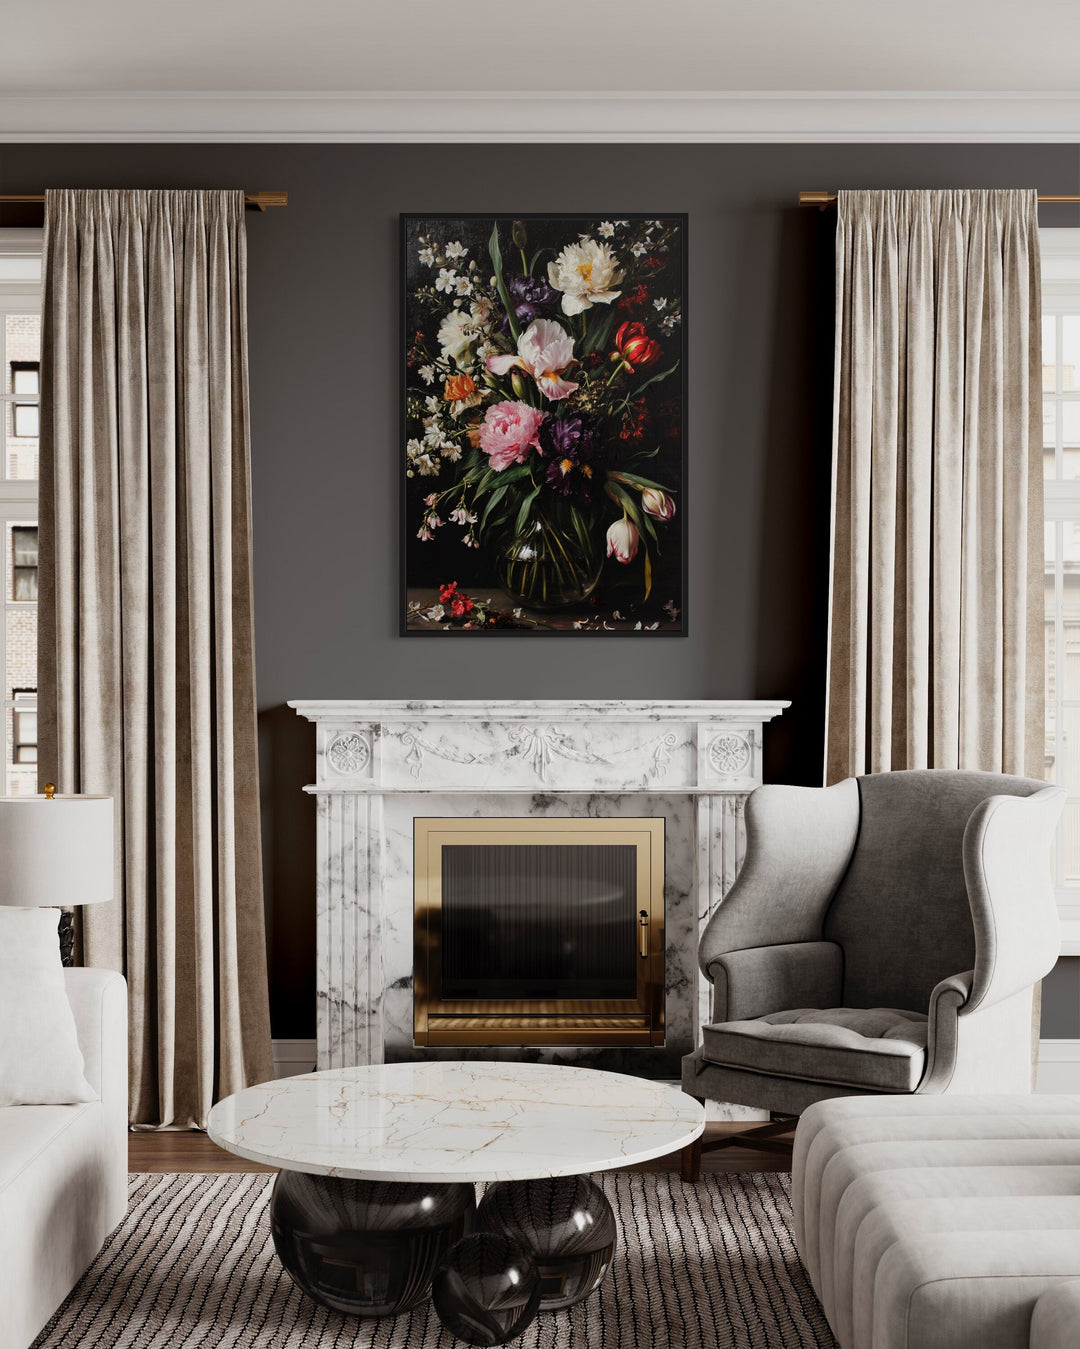 Moody Dark Academia Flowers Antique Style Framed Canvas Wall Art above fireplace